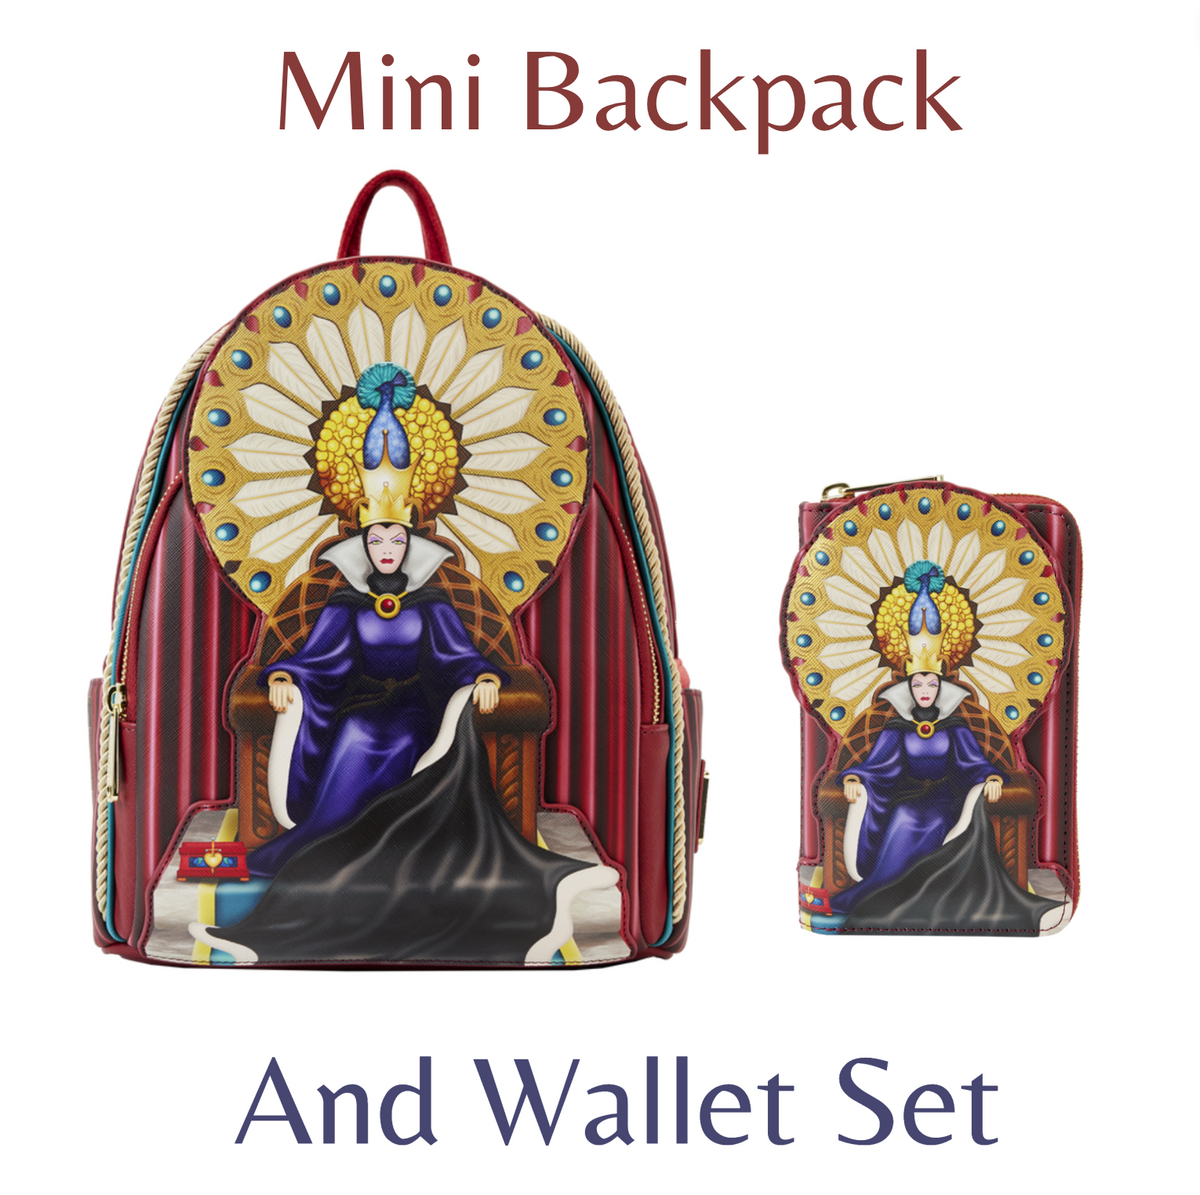 Buy Snow White Evil Queen Throne Mini Backpack at Loungefly.